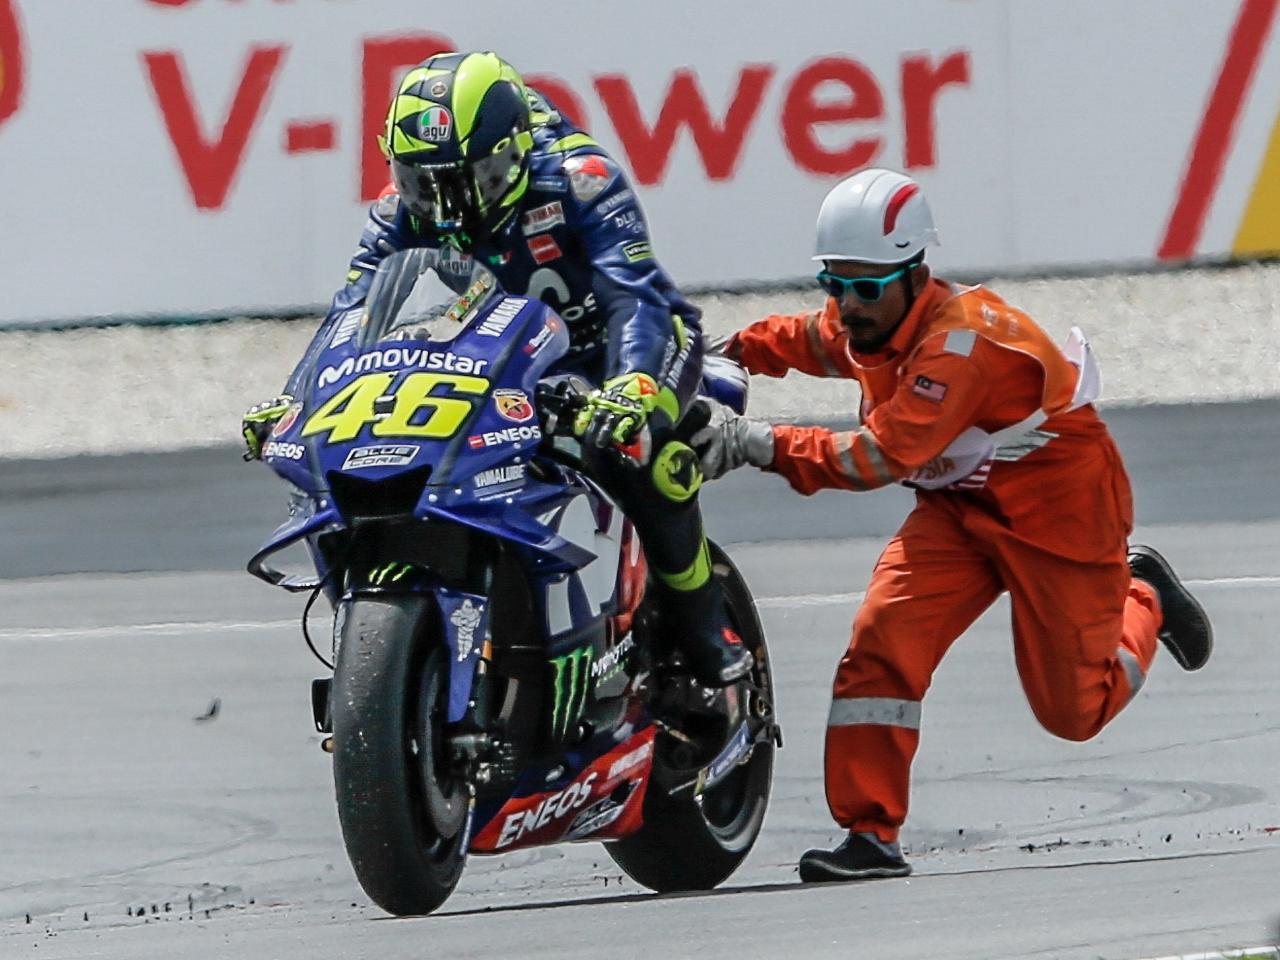 Malaysian Gp: Valentino Rossi Crashes Out Of Lead To Hand Champion Marc  Marquez Ninth Win Of The Season | The Independent | The Independent